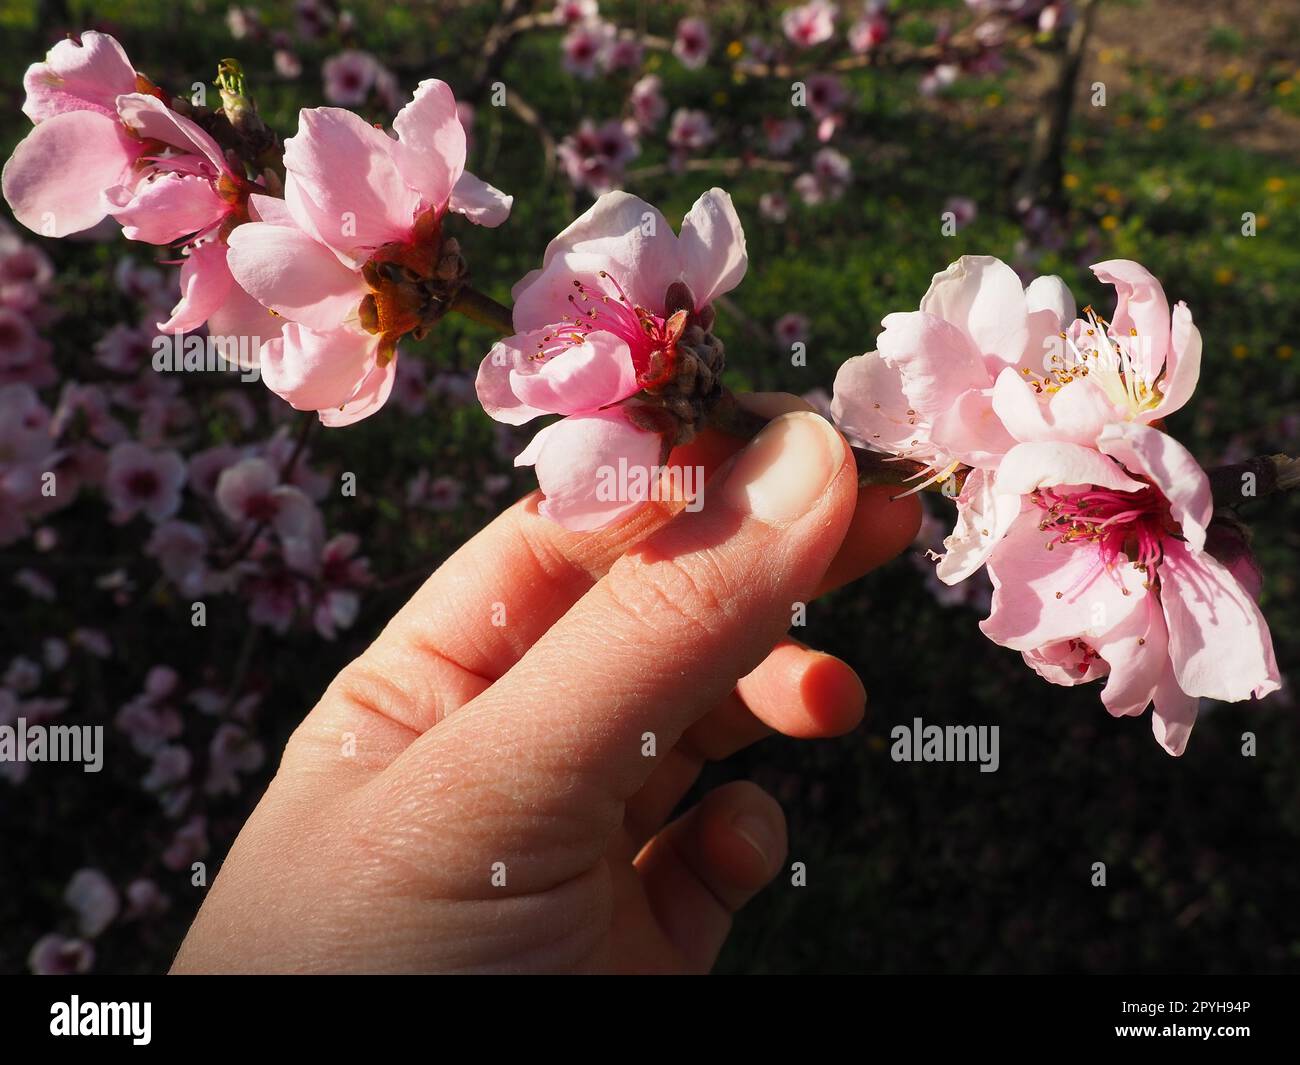 A female hand holds a branch with pink flowers. Pink flowers on the tree. Beautiful wild flowering in the spring garden. Cherry or plum branches with buds. Agriculture and horticulture. Stock Photo